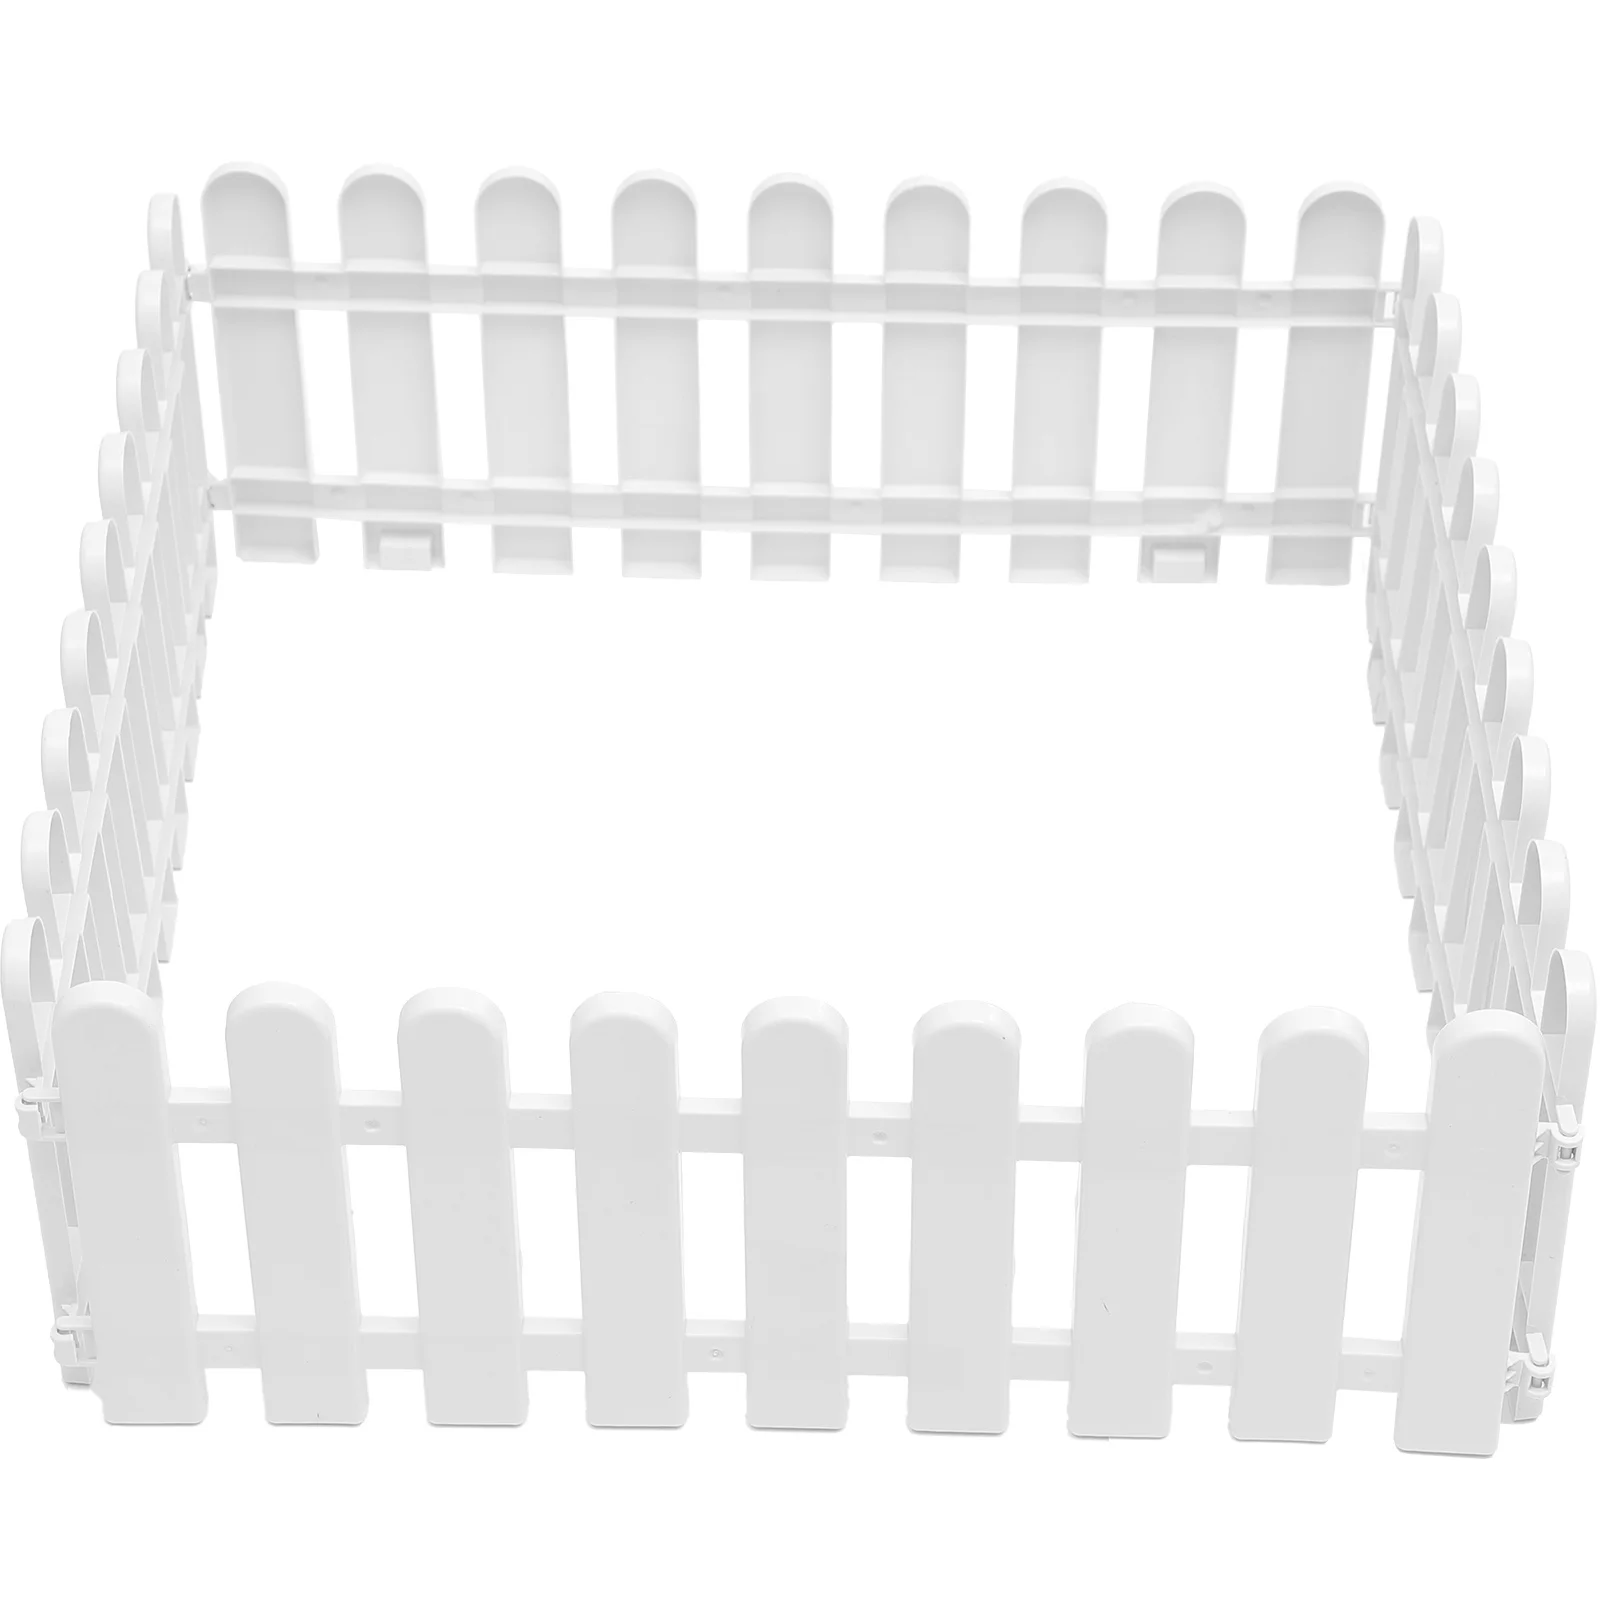 

The Fence Gardening Dog Fences for Yard Outdoor Border Temporary Fencing Durable Adornment Patio